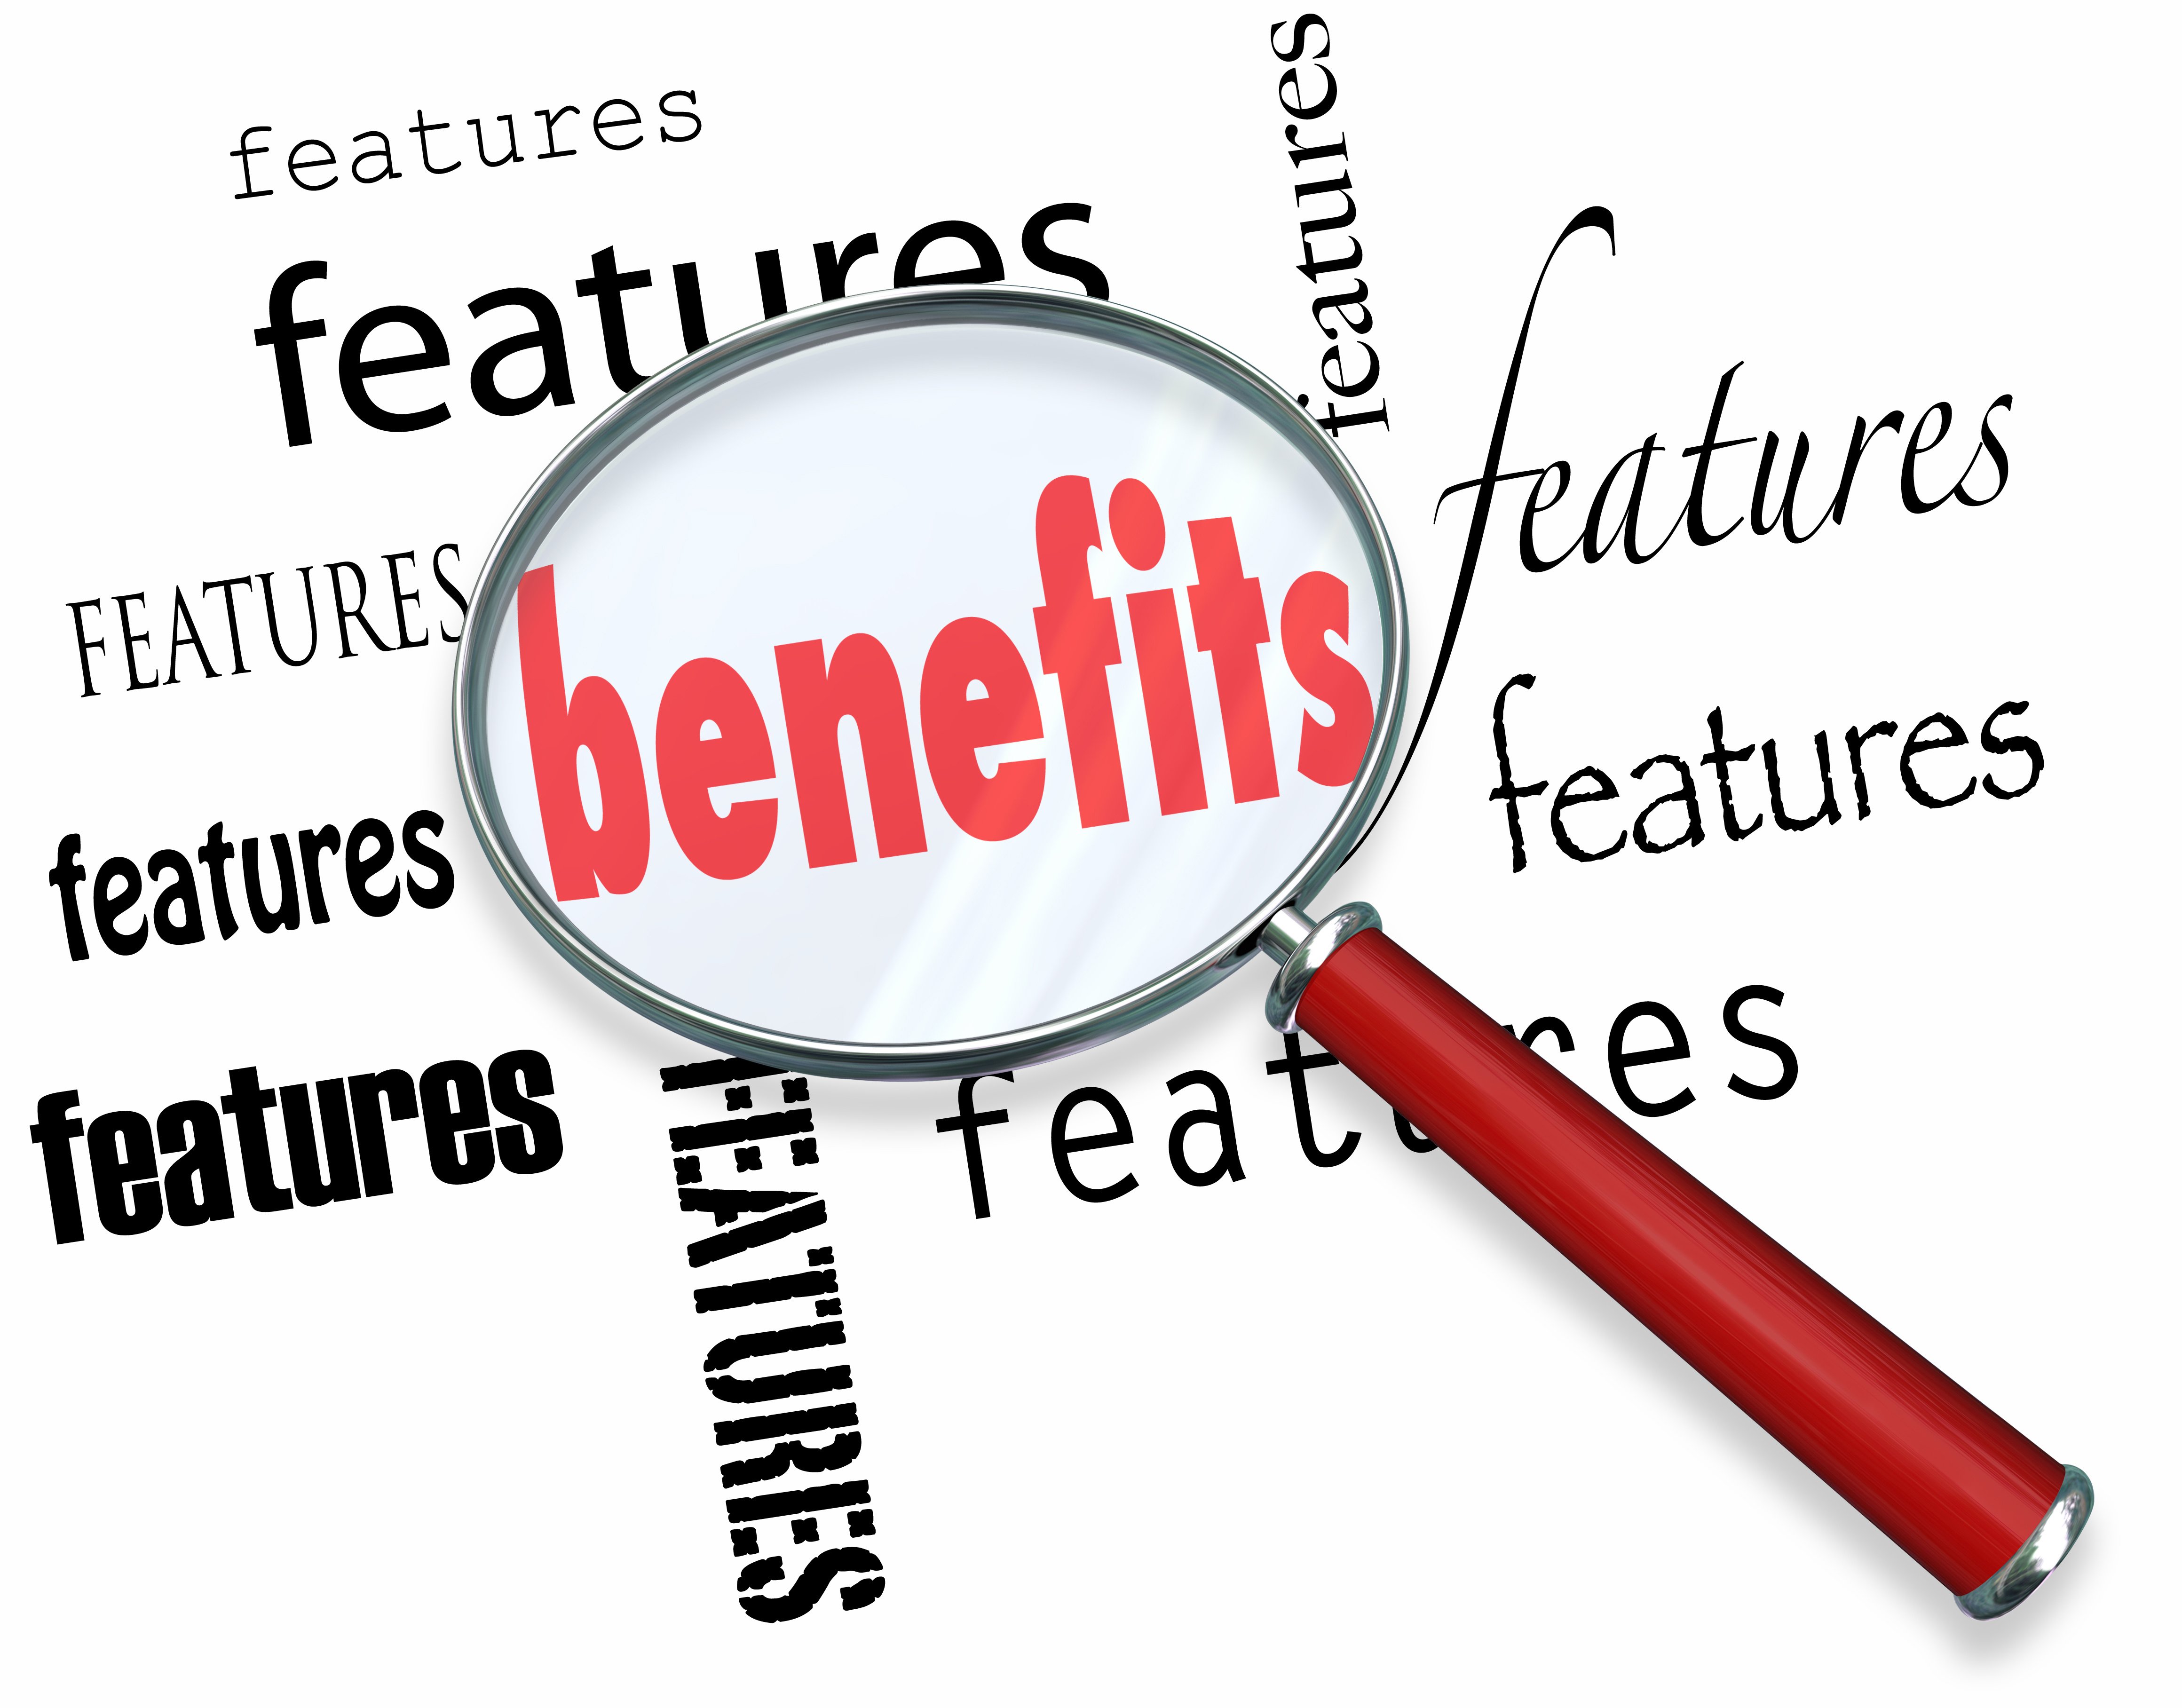 benefits & features of managed TM services